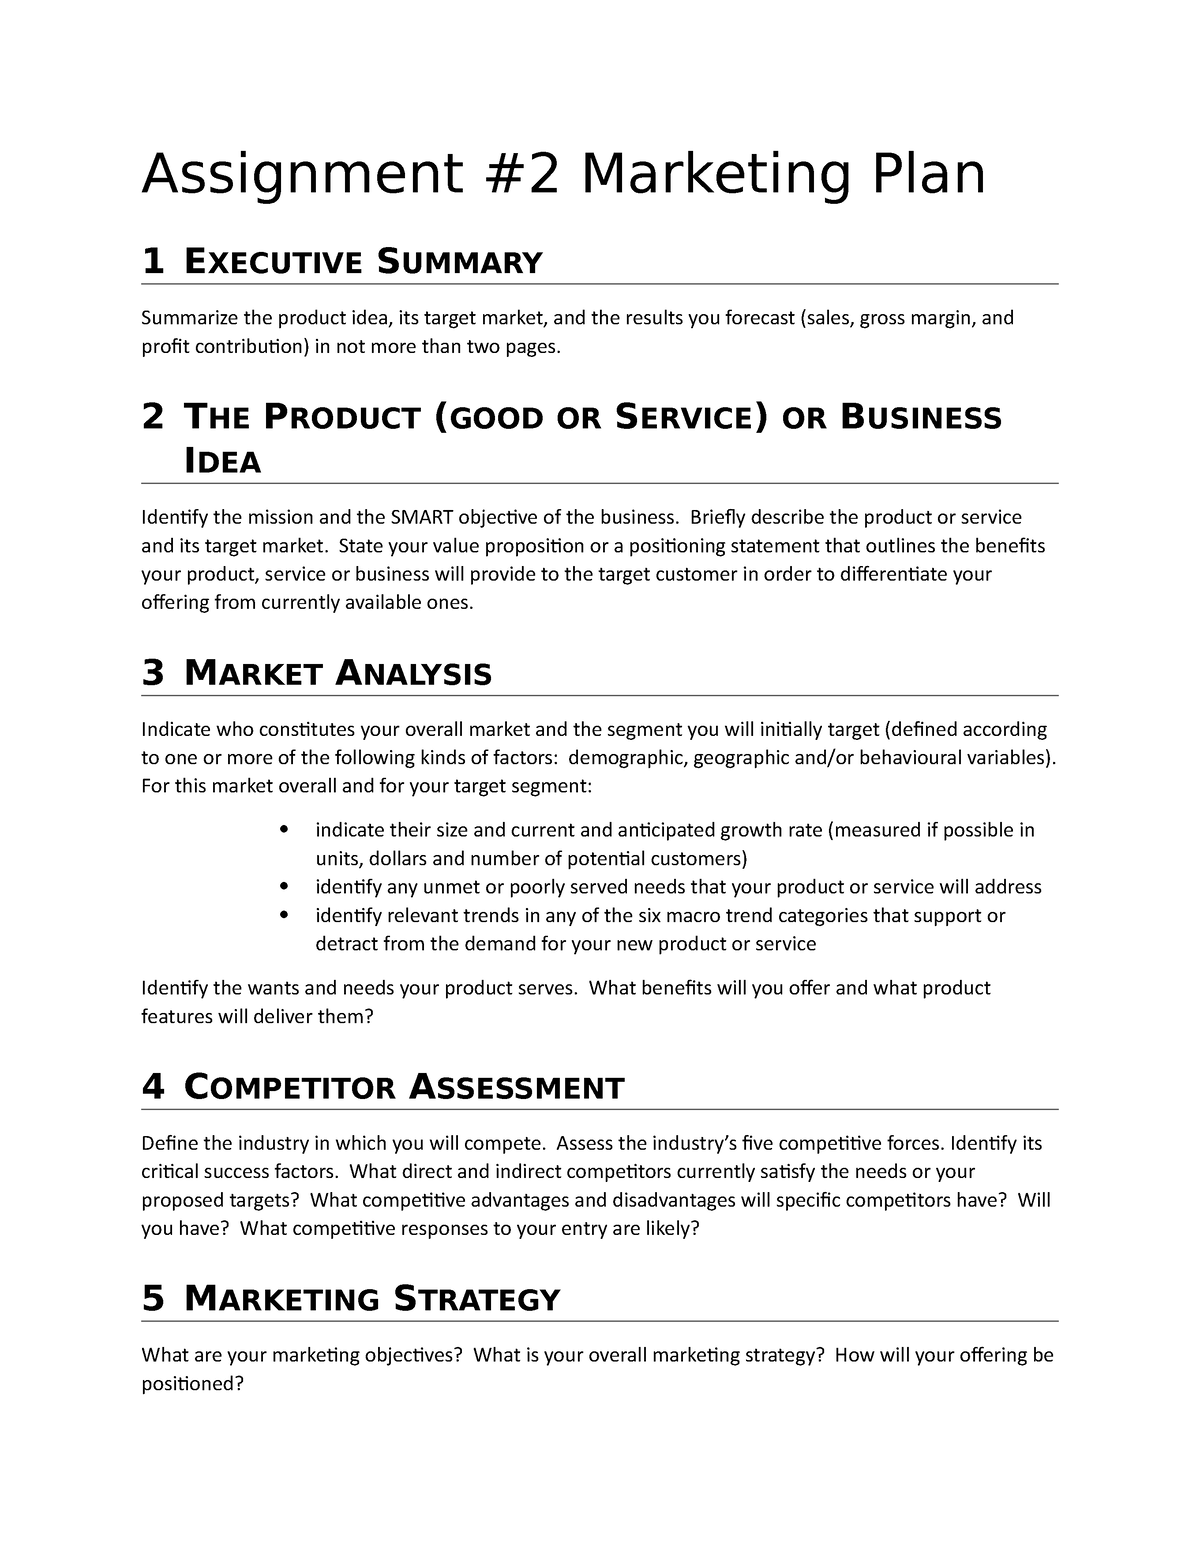 Assignment 2 Marketing Plan 2 The Product Good Or Service Or Business Idea Identify The